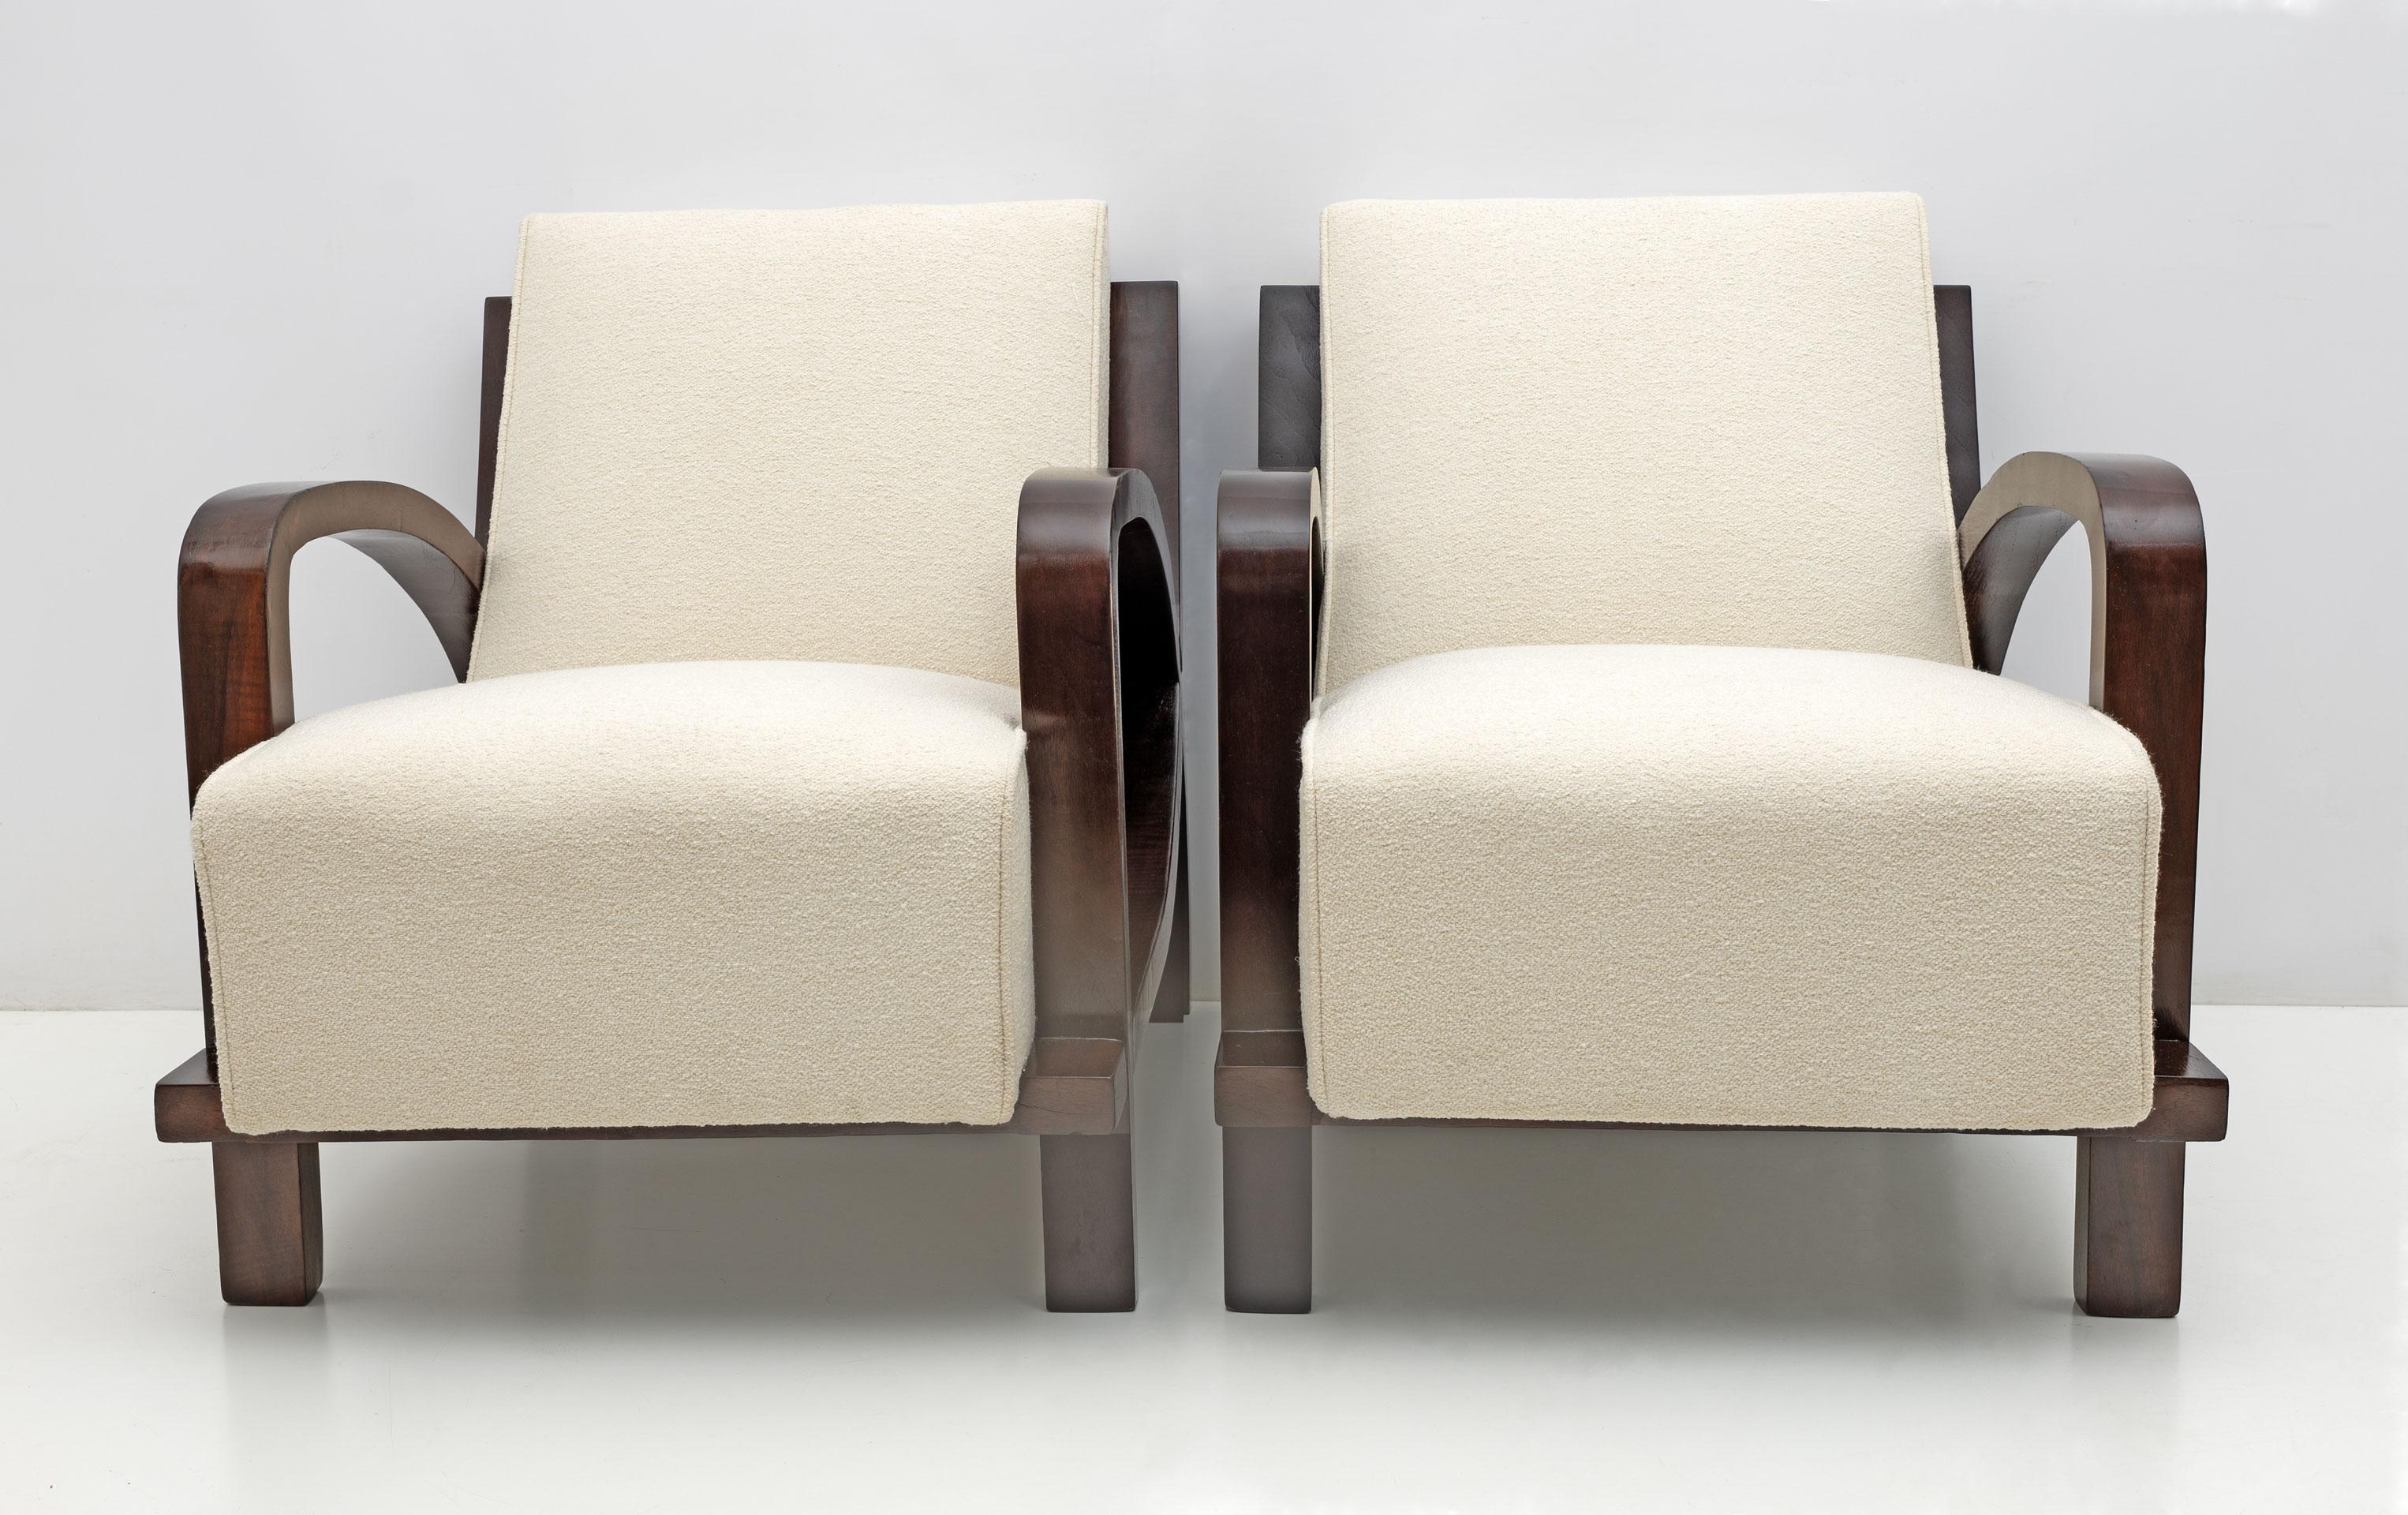 Extraordinary armchairs restored and upholstered in fine ivory-coloured Bouclè. These armchairs have a very dynamic and abundant appearance, beautifully curved and walnut veneered armrests and backrest, which match naturally with the upholstery. The